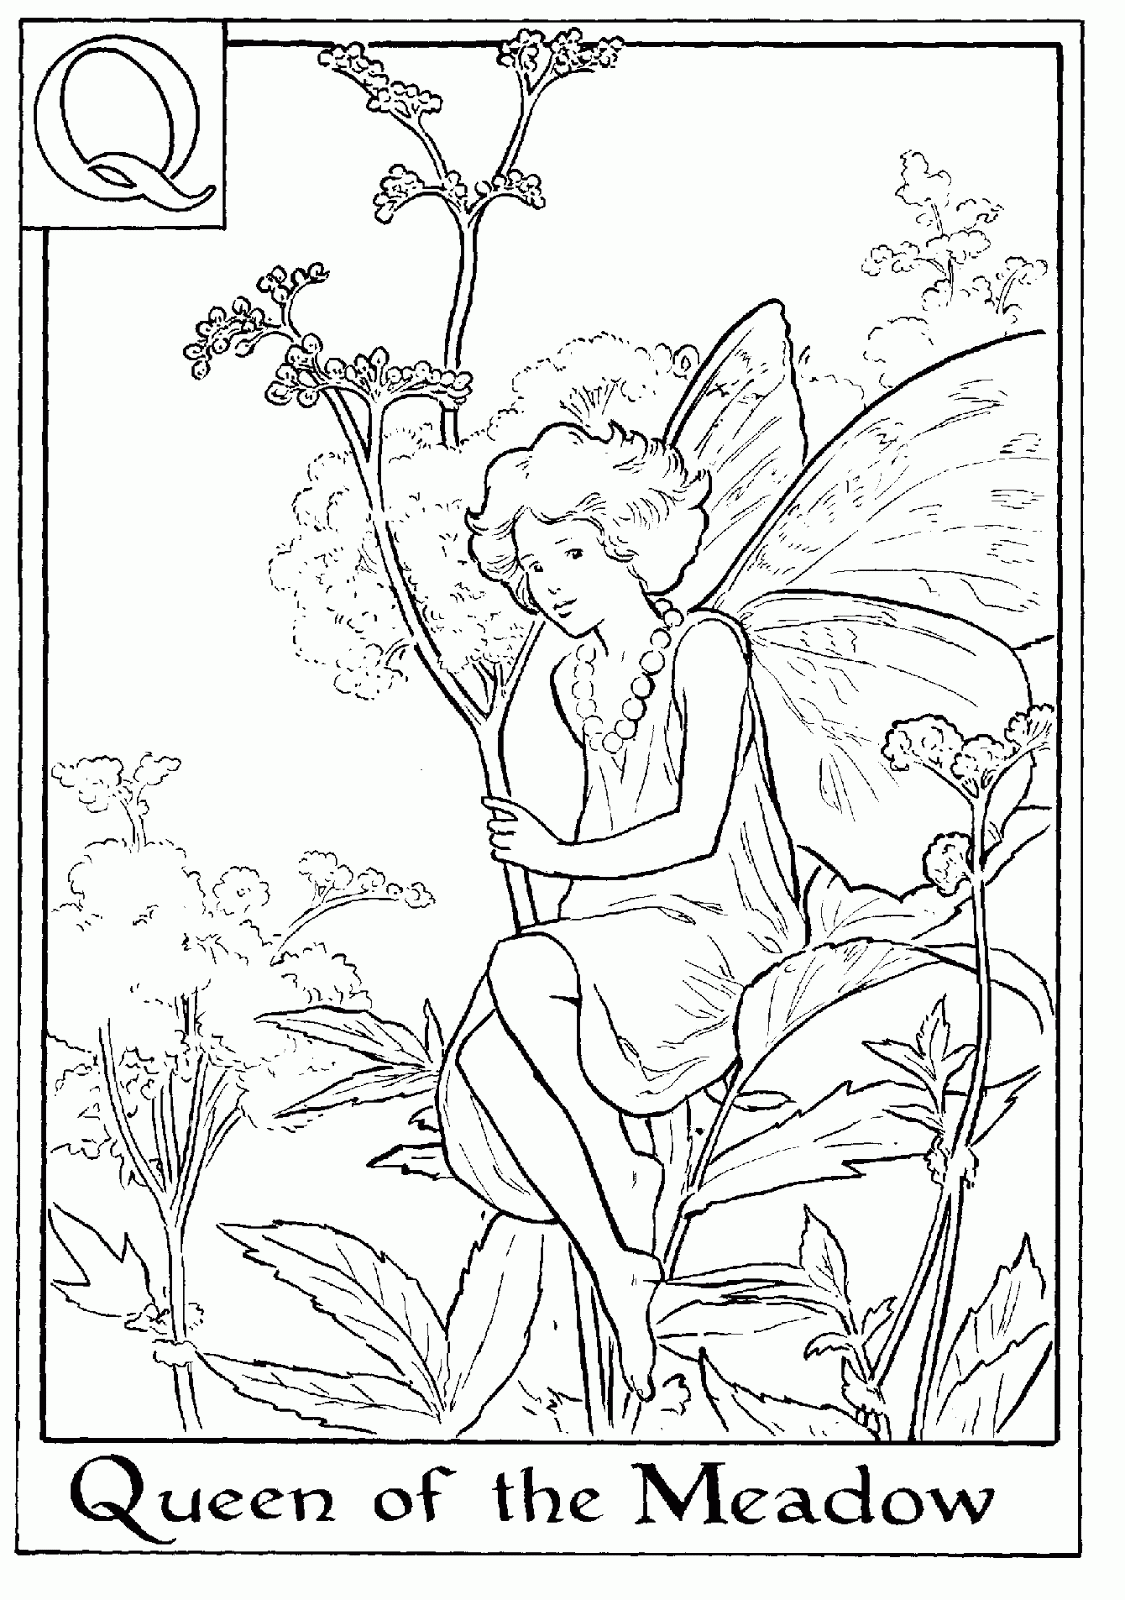 fairies coloring book pages - photo #50